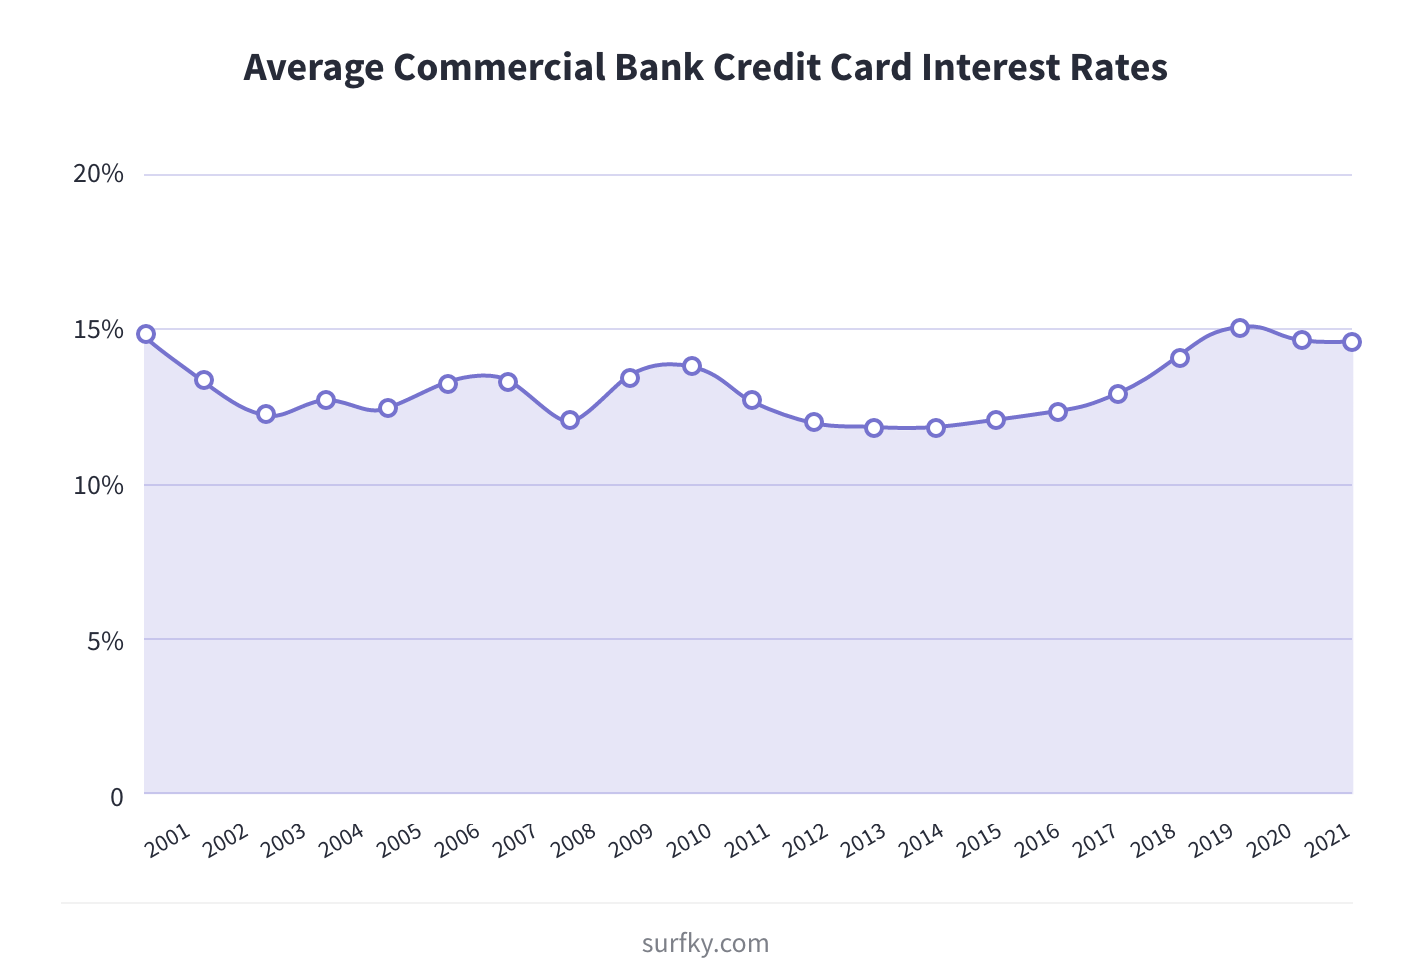 average credit card interest rates line chart from 2001 - 2021